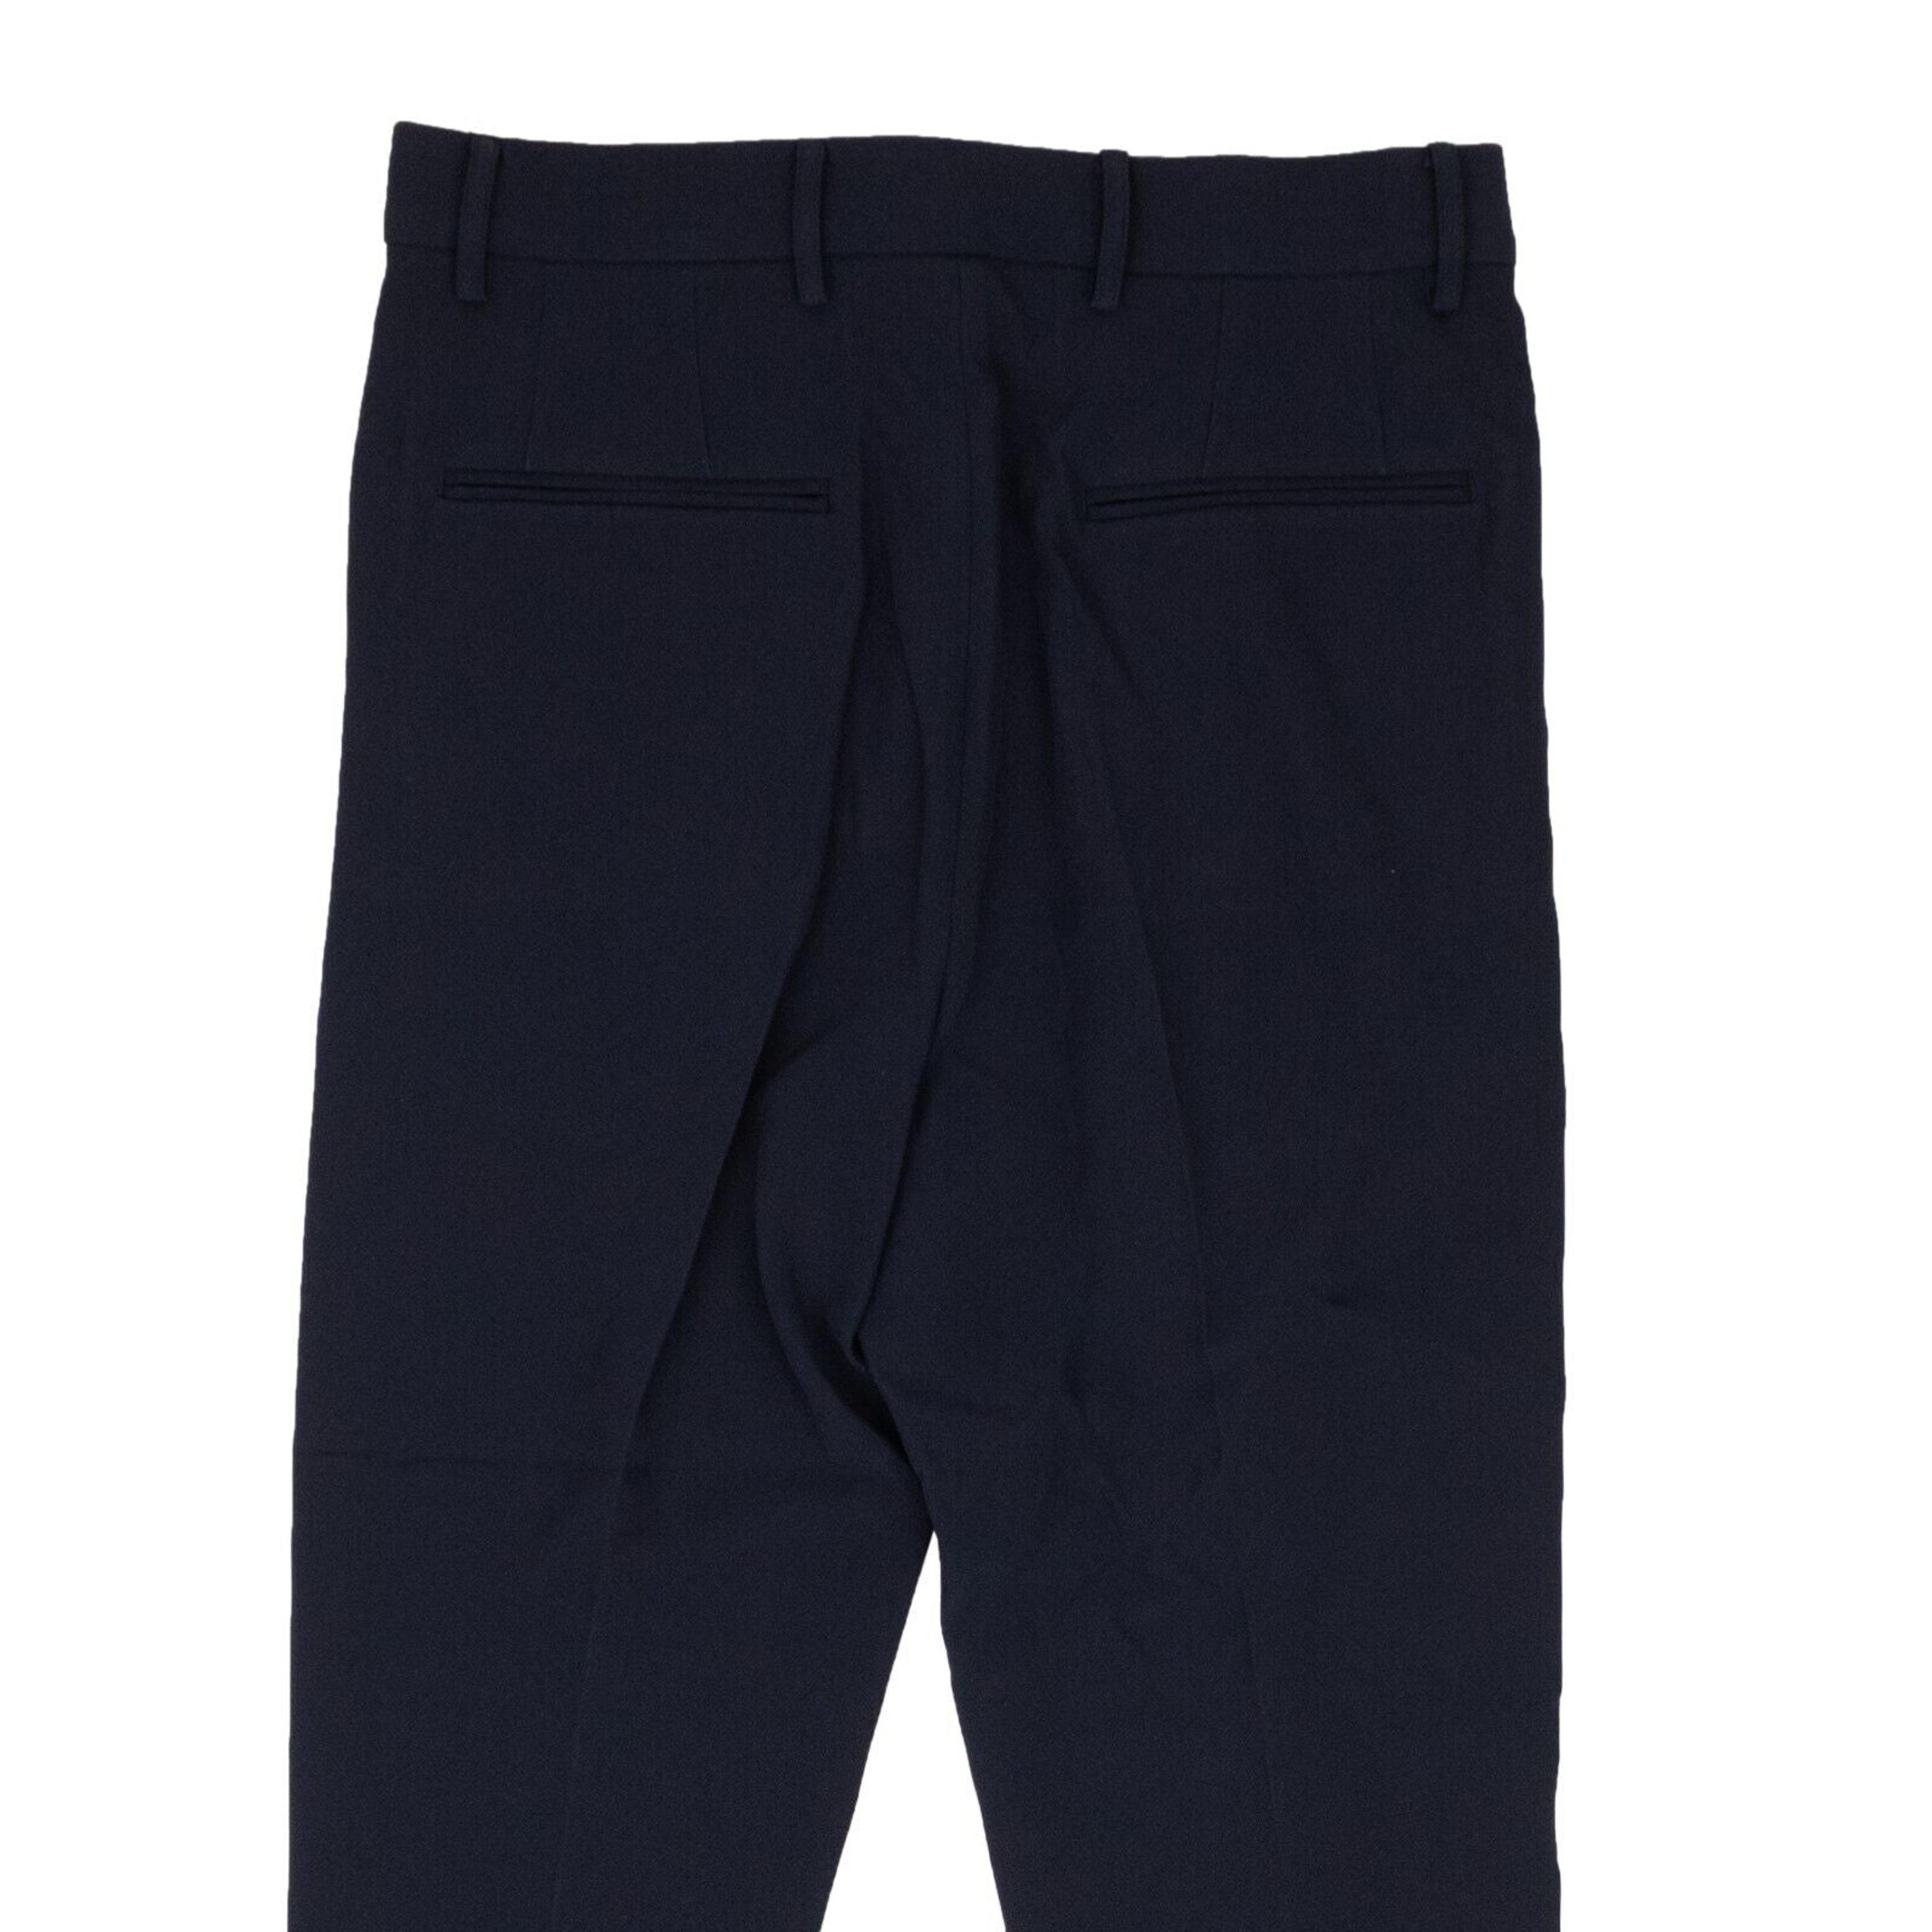 Alternate View 3 of Opening Ceremony Twill Trouser - Navy